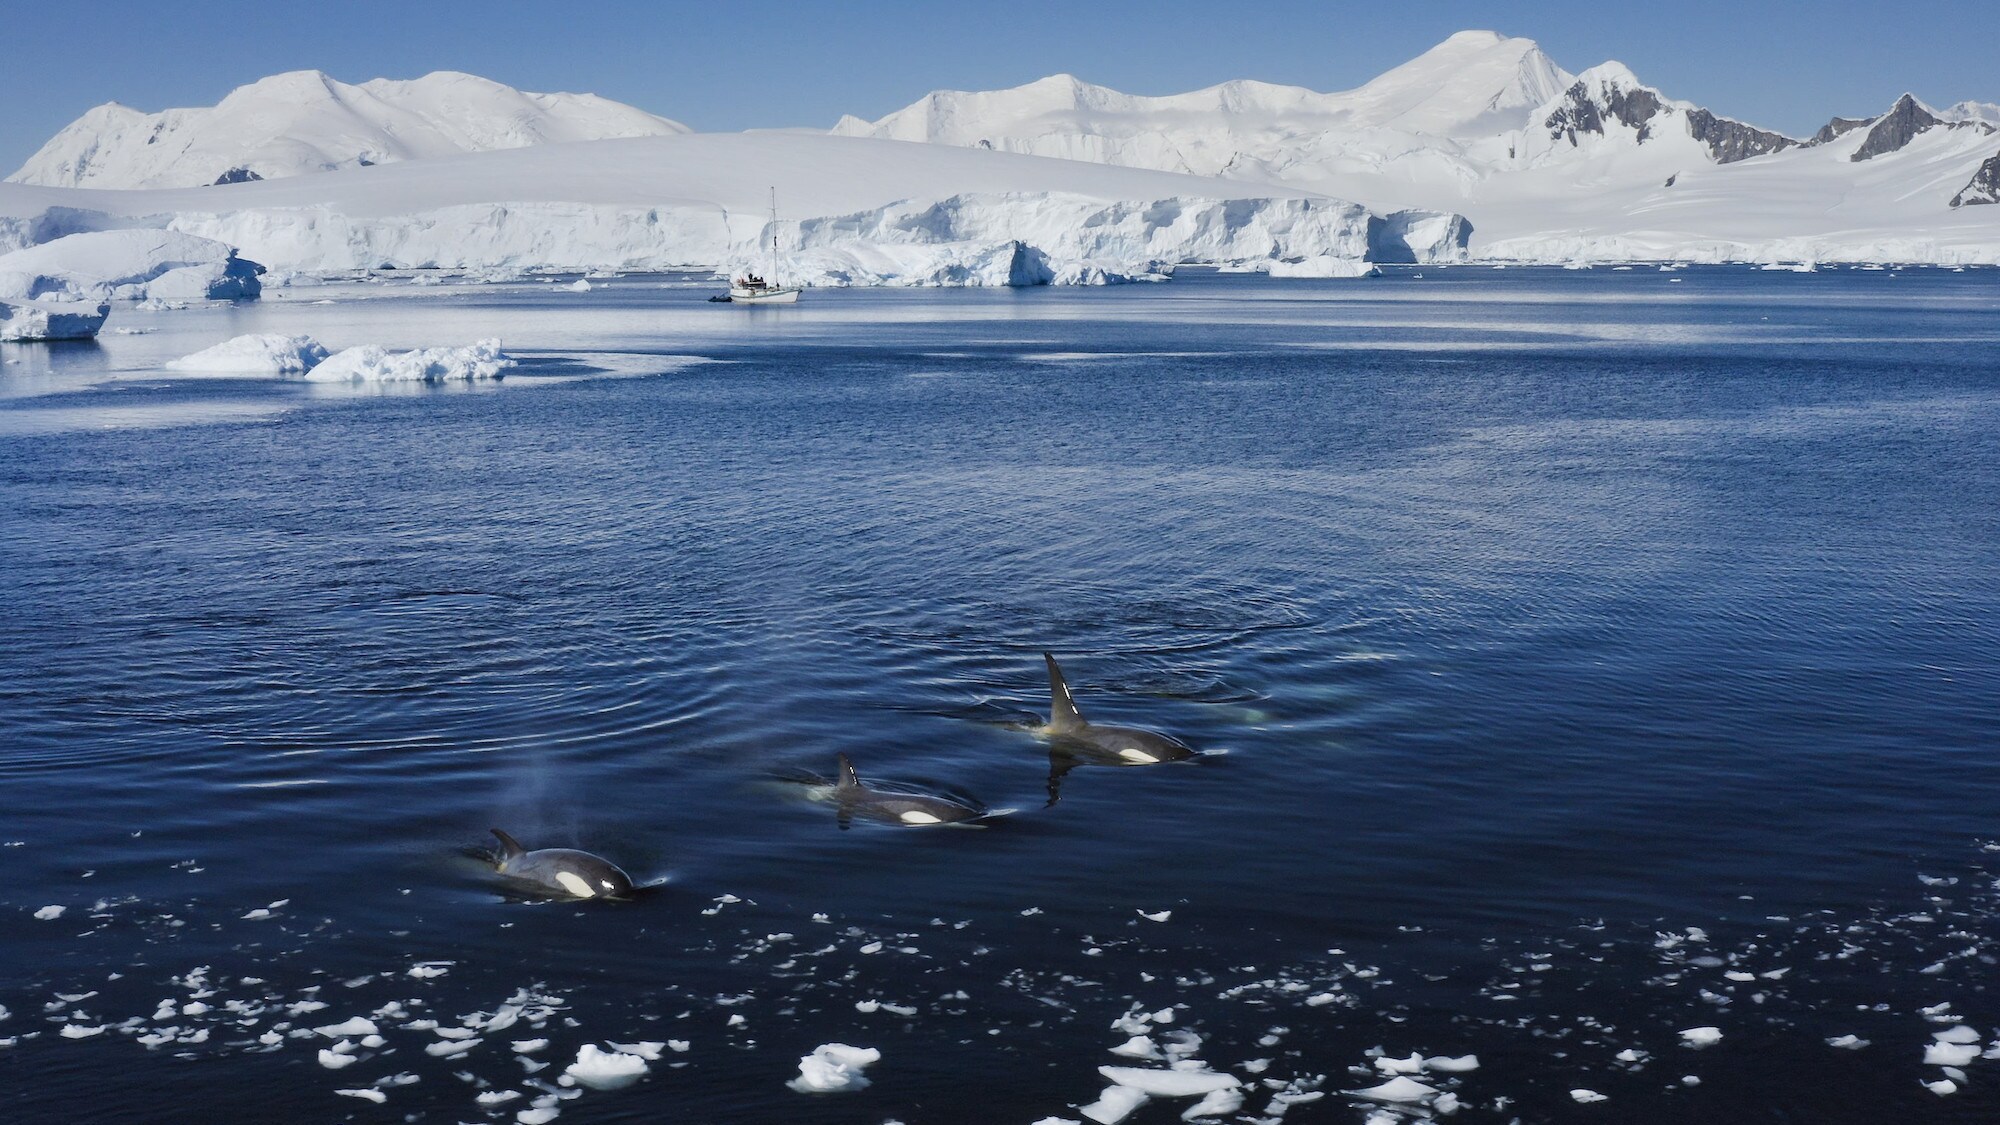 Three killer whales on the surface of the water with glaciers in the background. (credit: National Geographic for Disney+/Bertie Gregory)